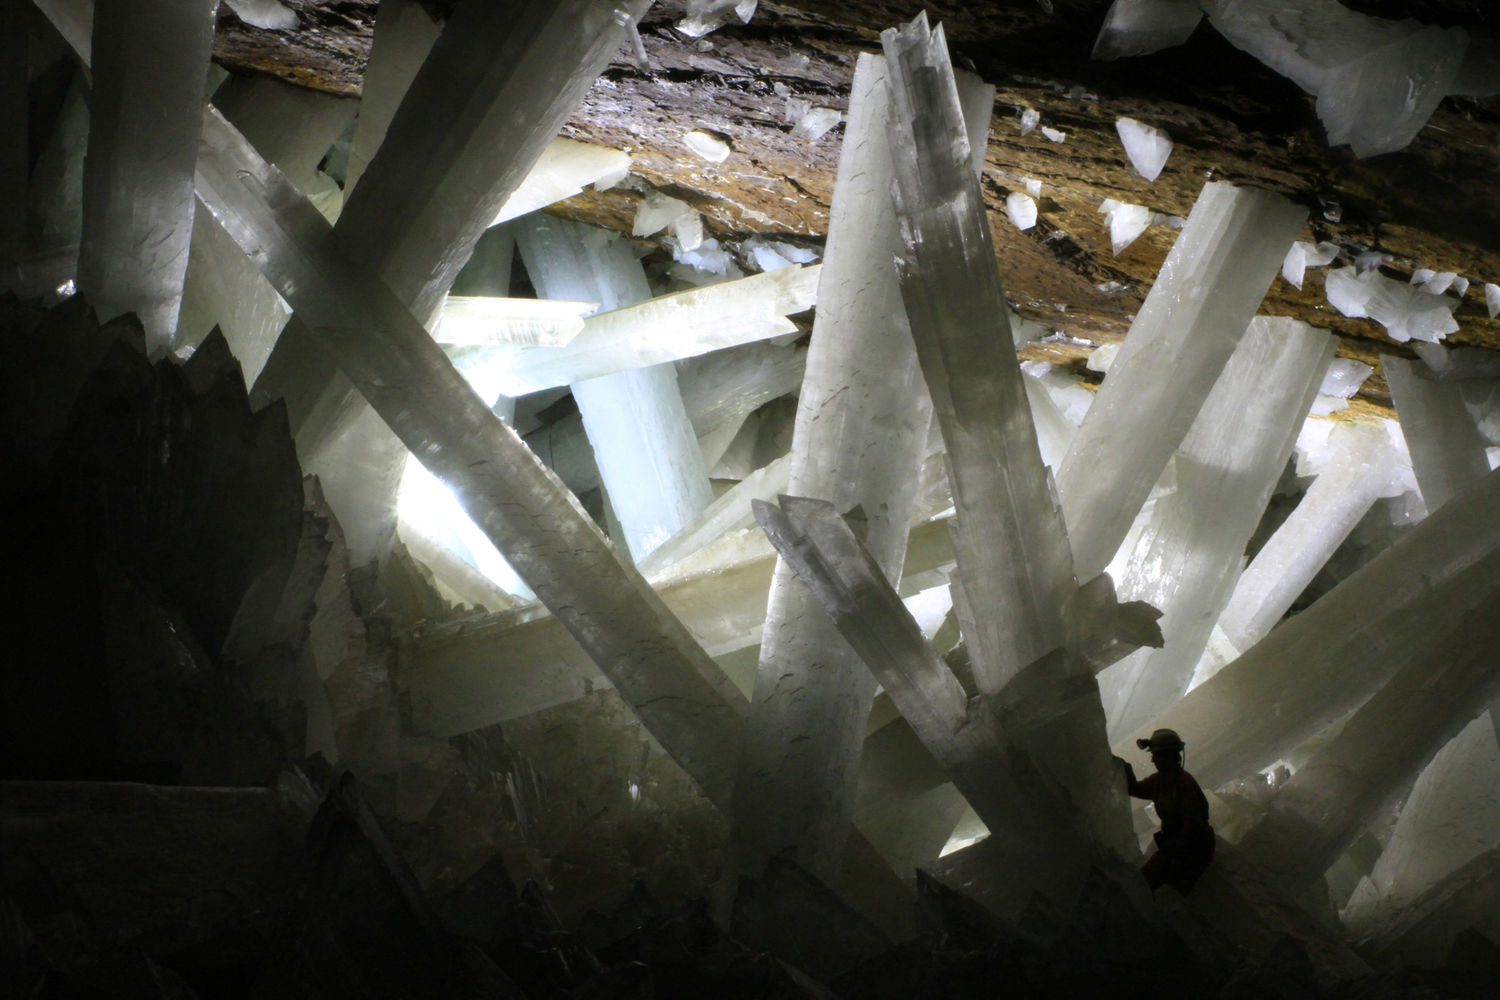 Gypsum crystals in the caves of the Naica Mine. Photo: Alexander Van Driessche, CC-BY-3.0